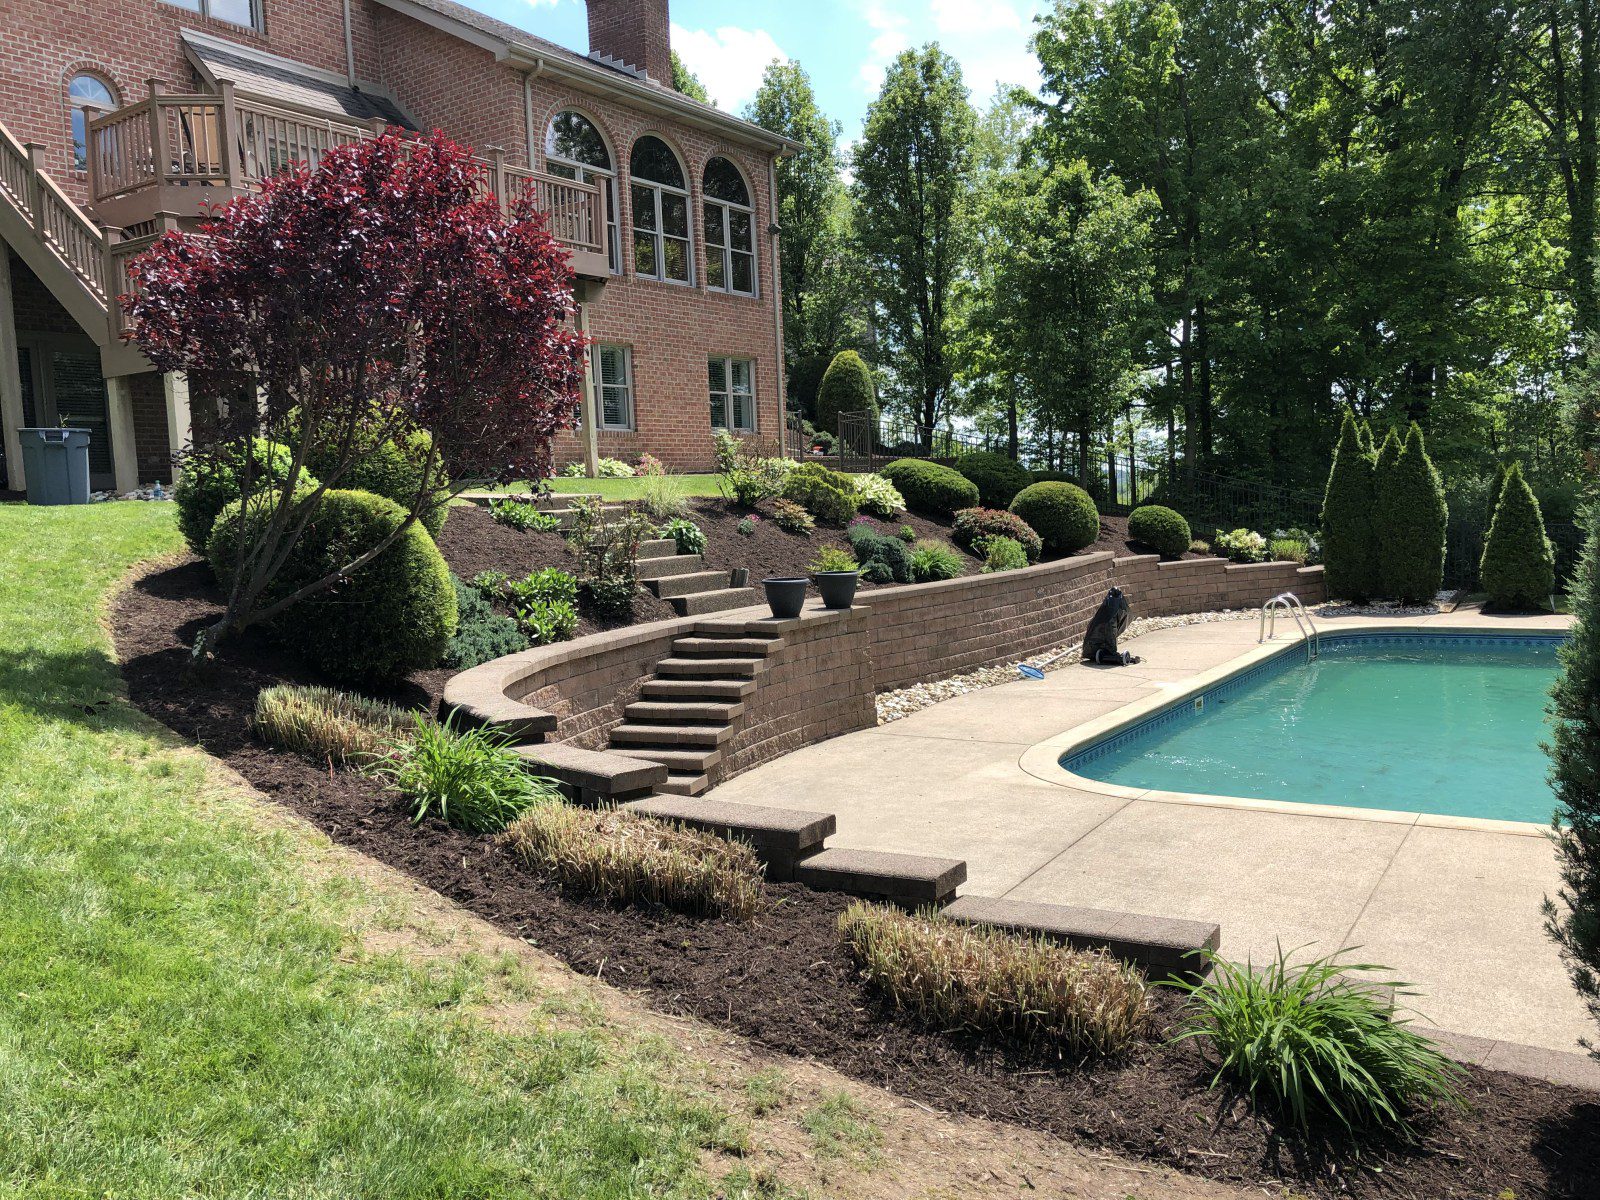 How to Install an Irrigation System for Your Landscape